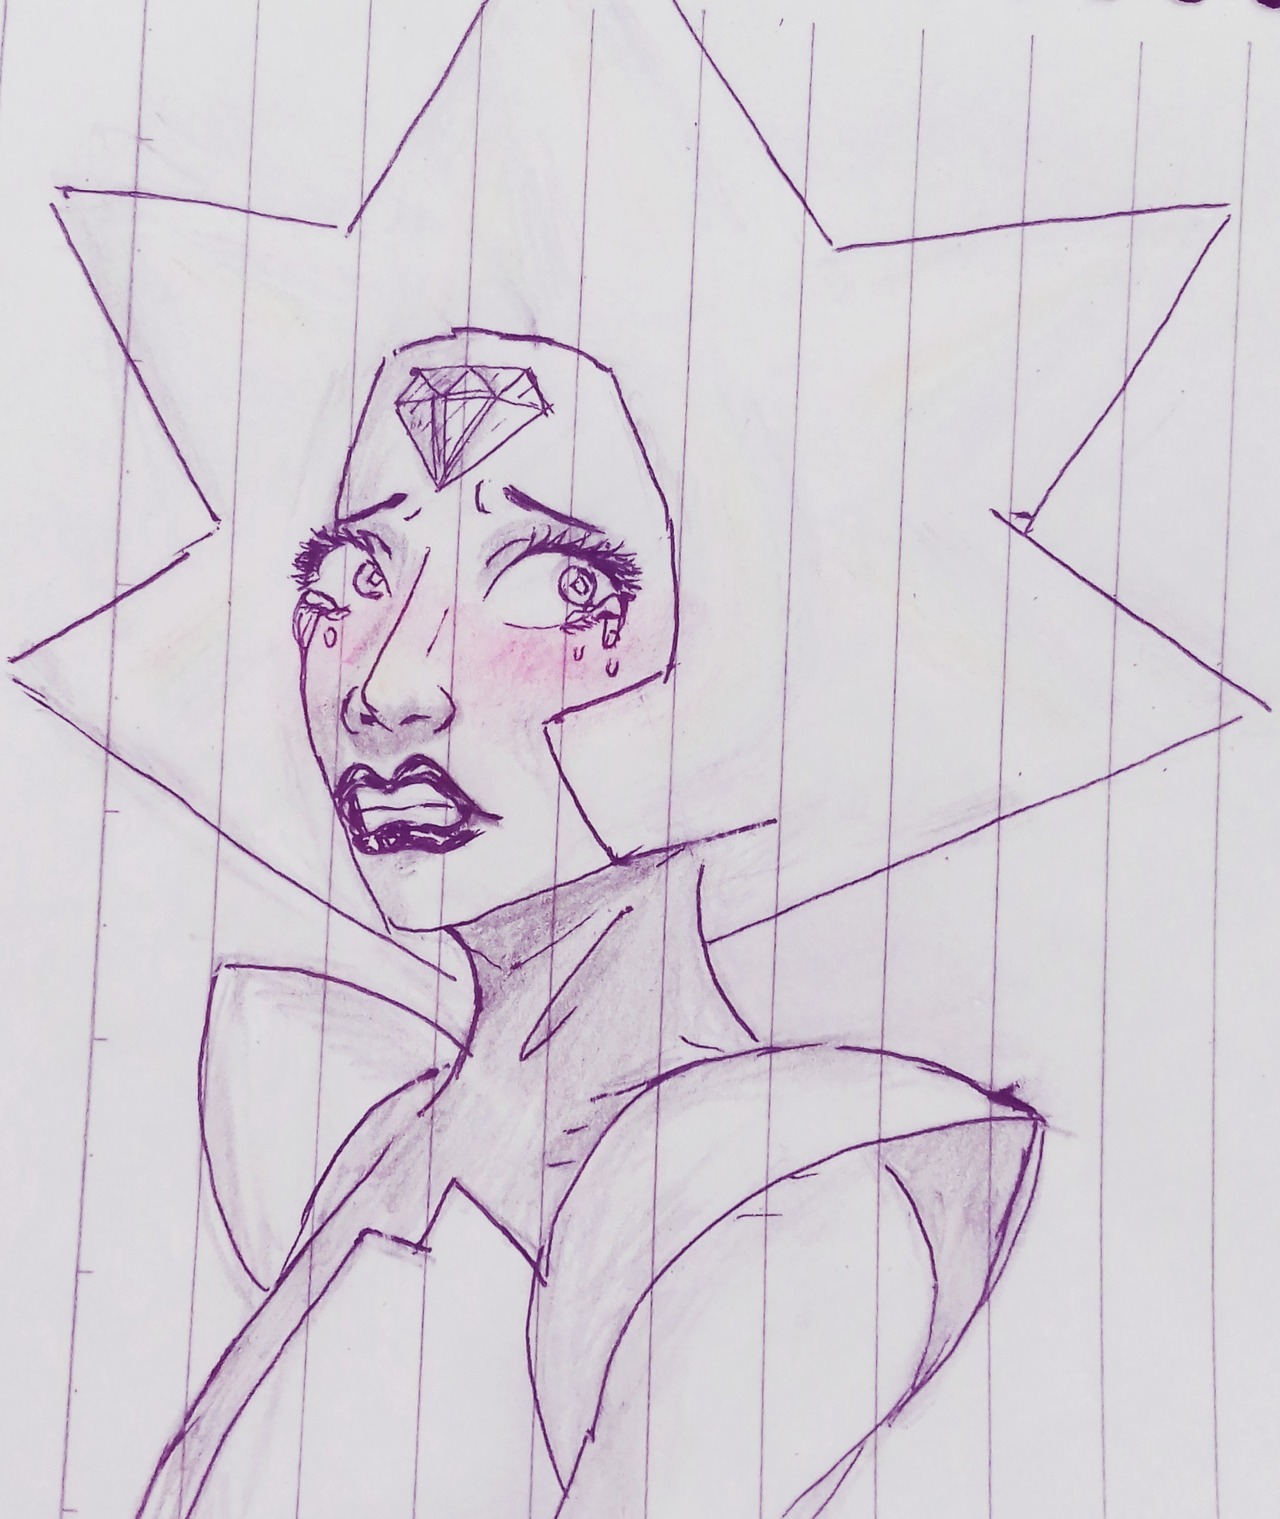 "If I'm not perfect then what am I"
*cough* college exams *cough* 
Anyways im jumping on the SU bandwagon again to draw blushy White Diamond 💎